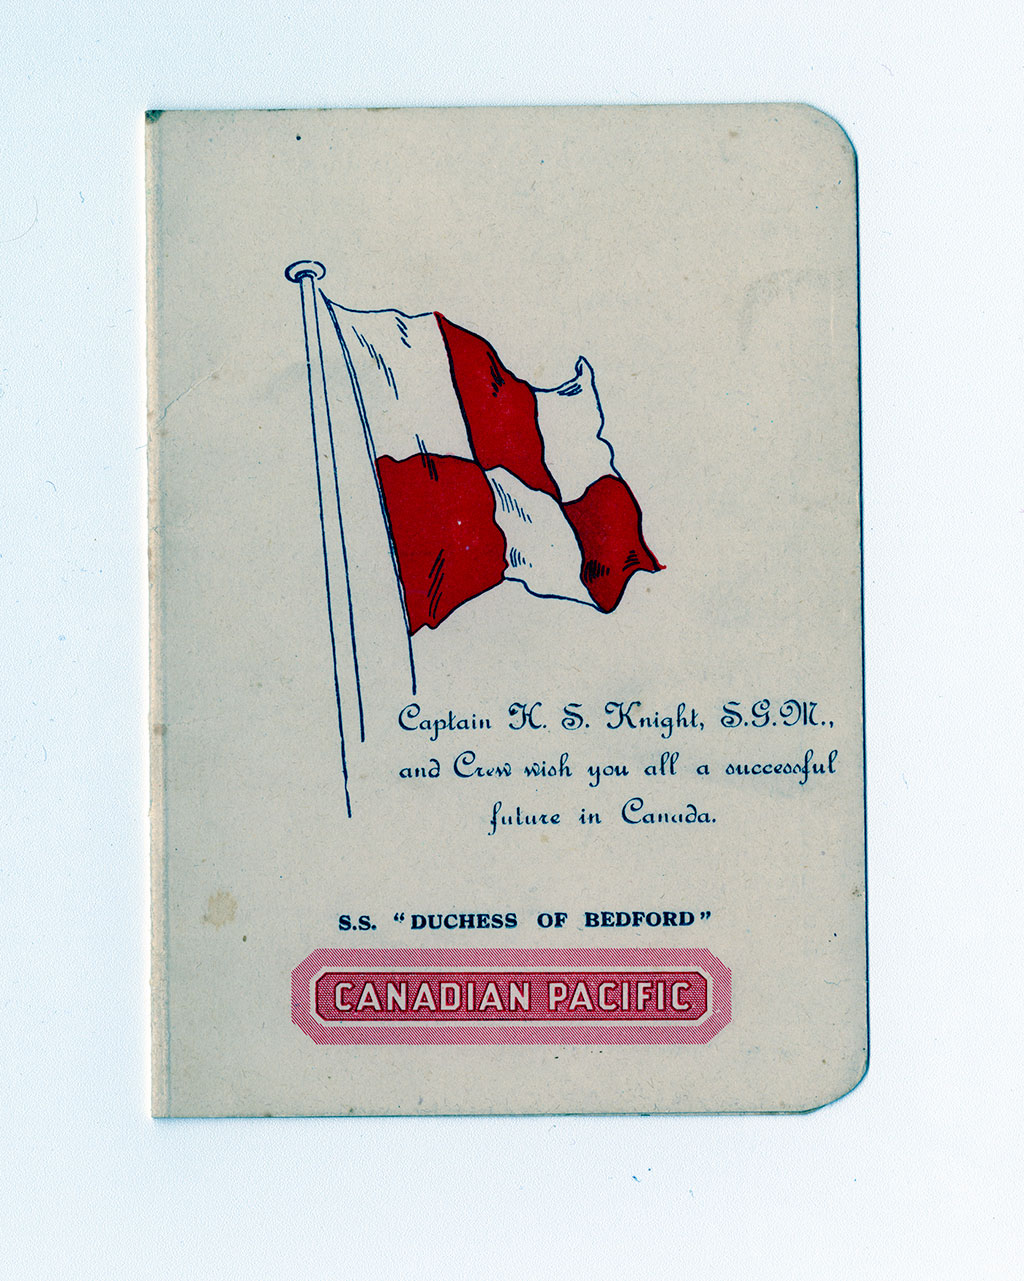 Old-fashioned cover of a ship’s menu showing a red and white coloured flag and the name of the ship and ship’s captain.